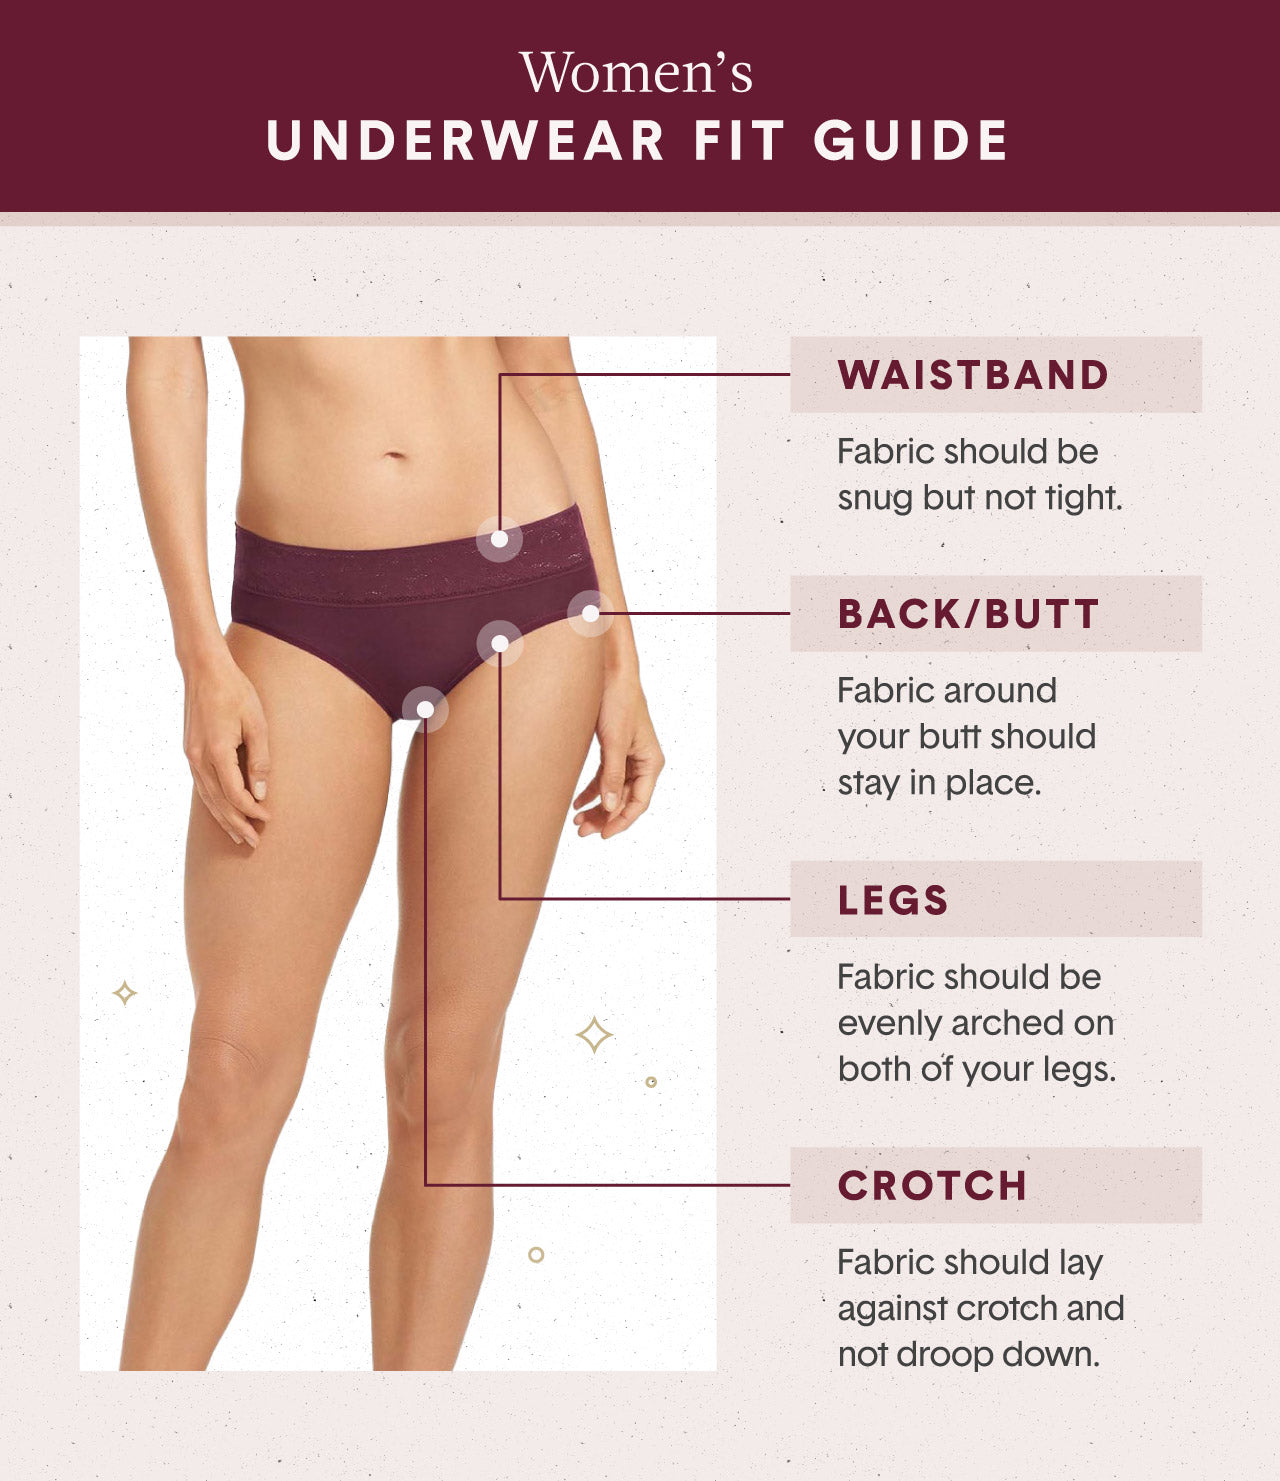 Are YOU wearing the right underwear for your shape?